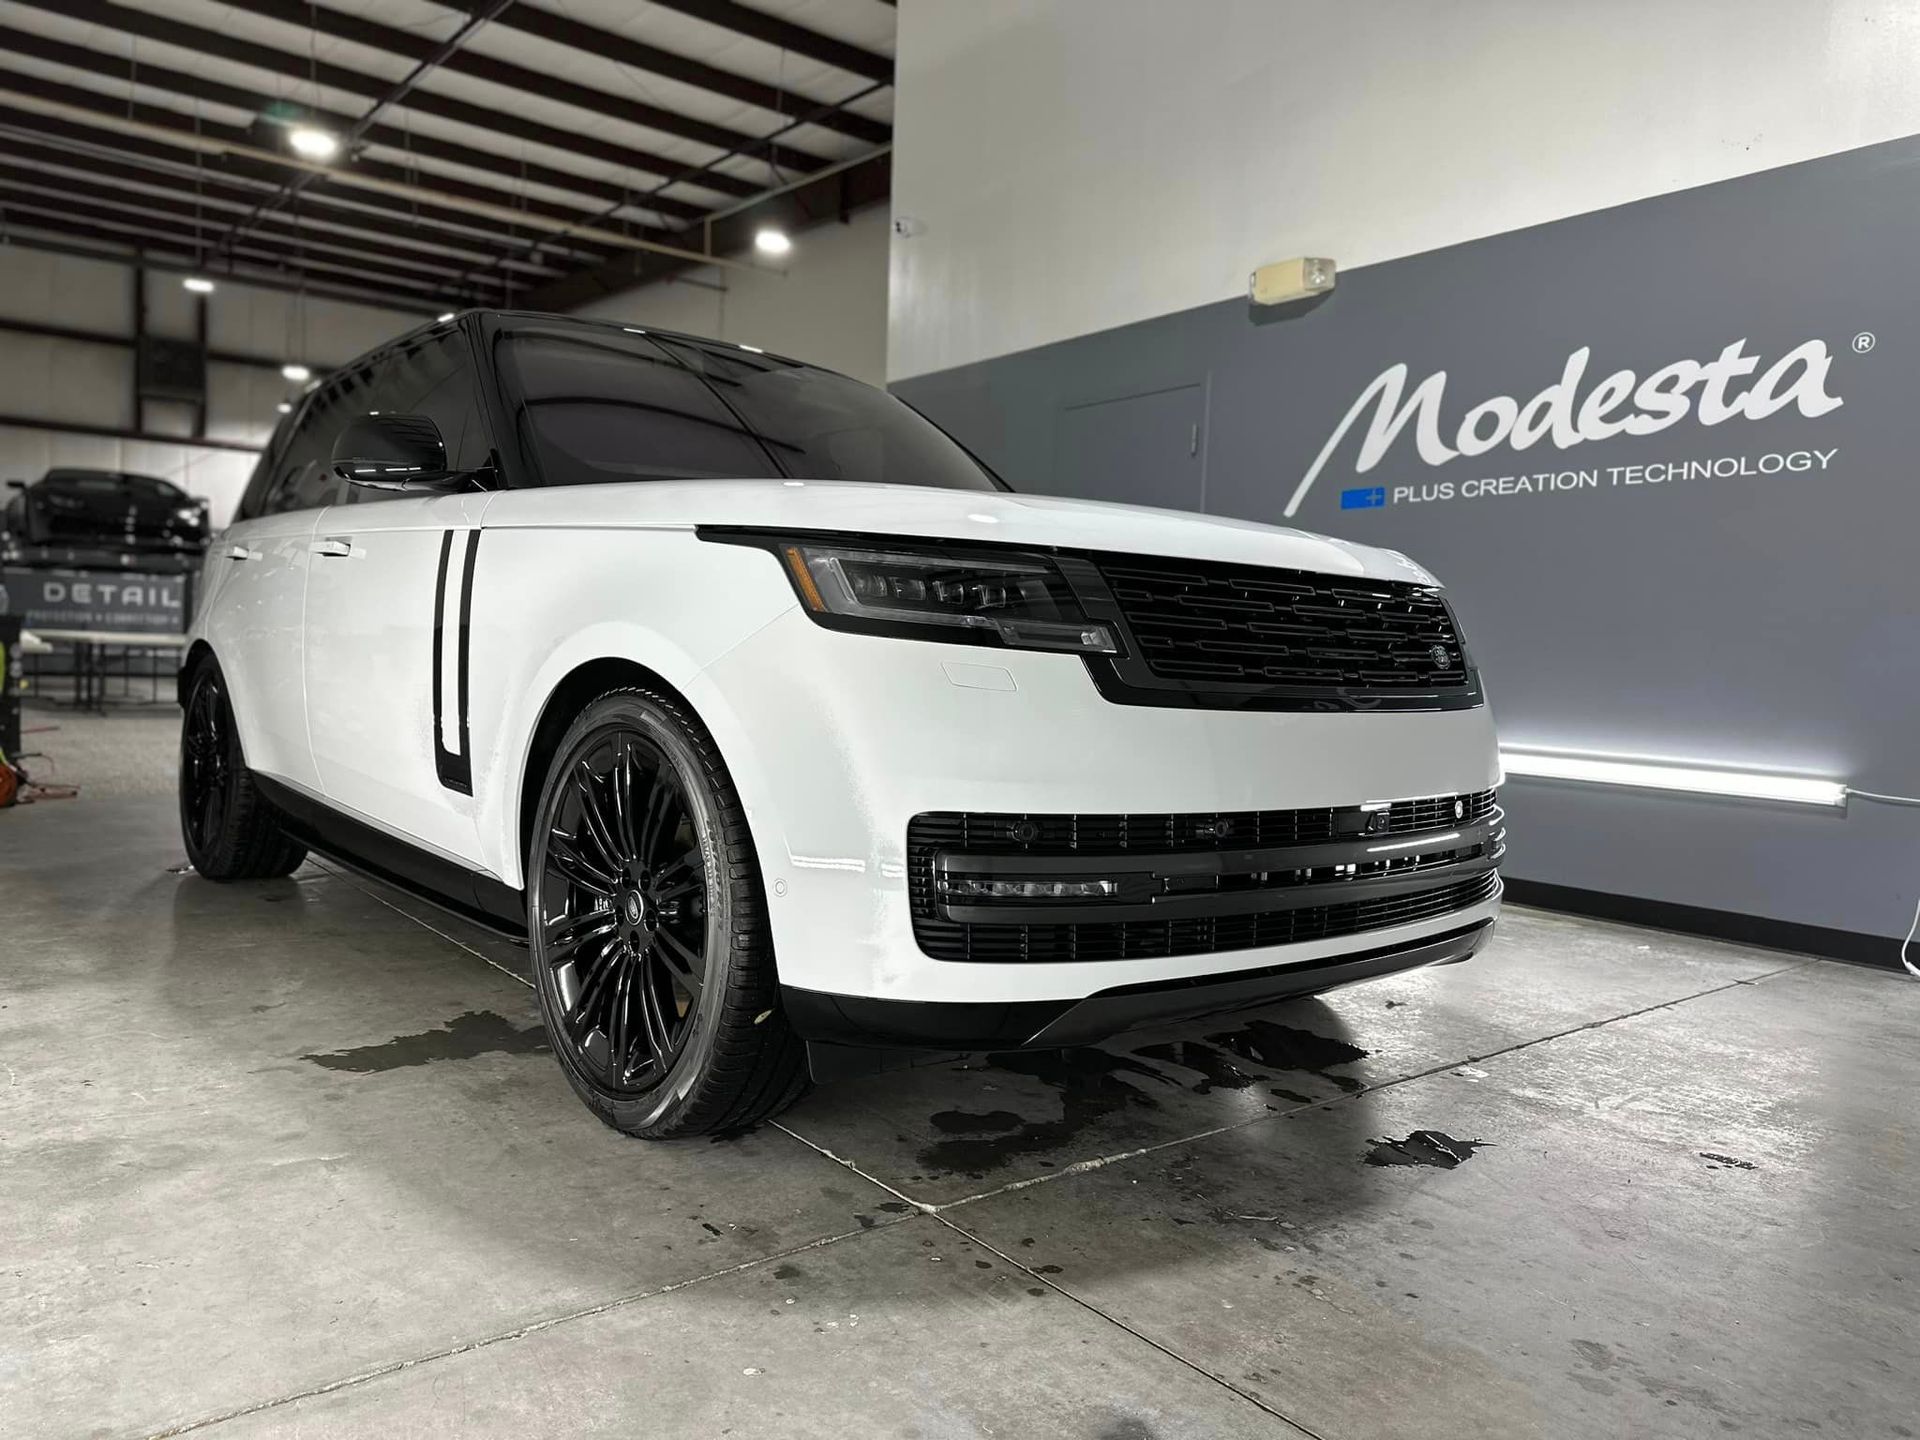 Range Rover Autobiography Detailing, Window Tint, Interior and Exterior Paint Protection Film and Modesta Coatings Orlando USA